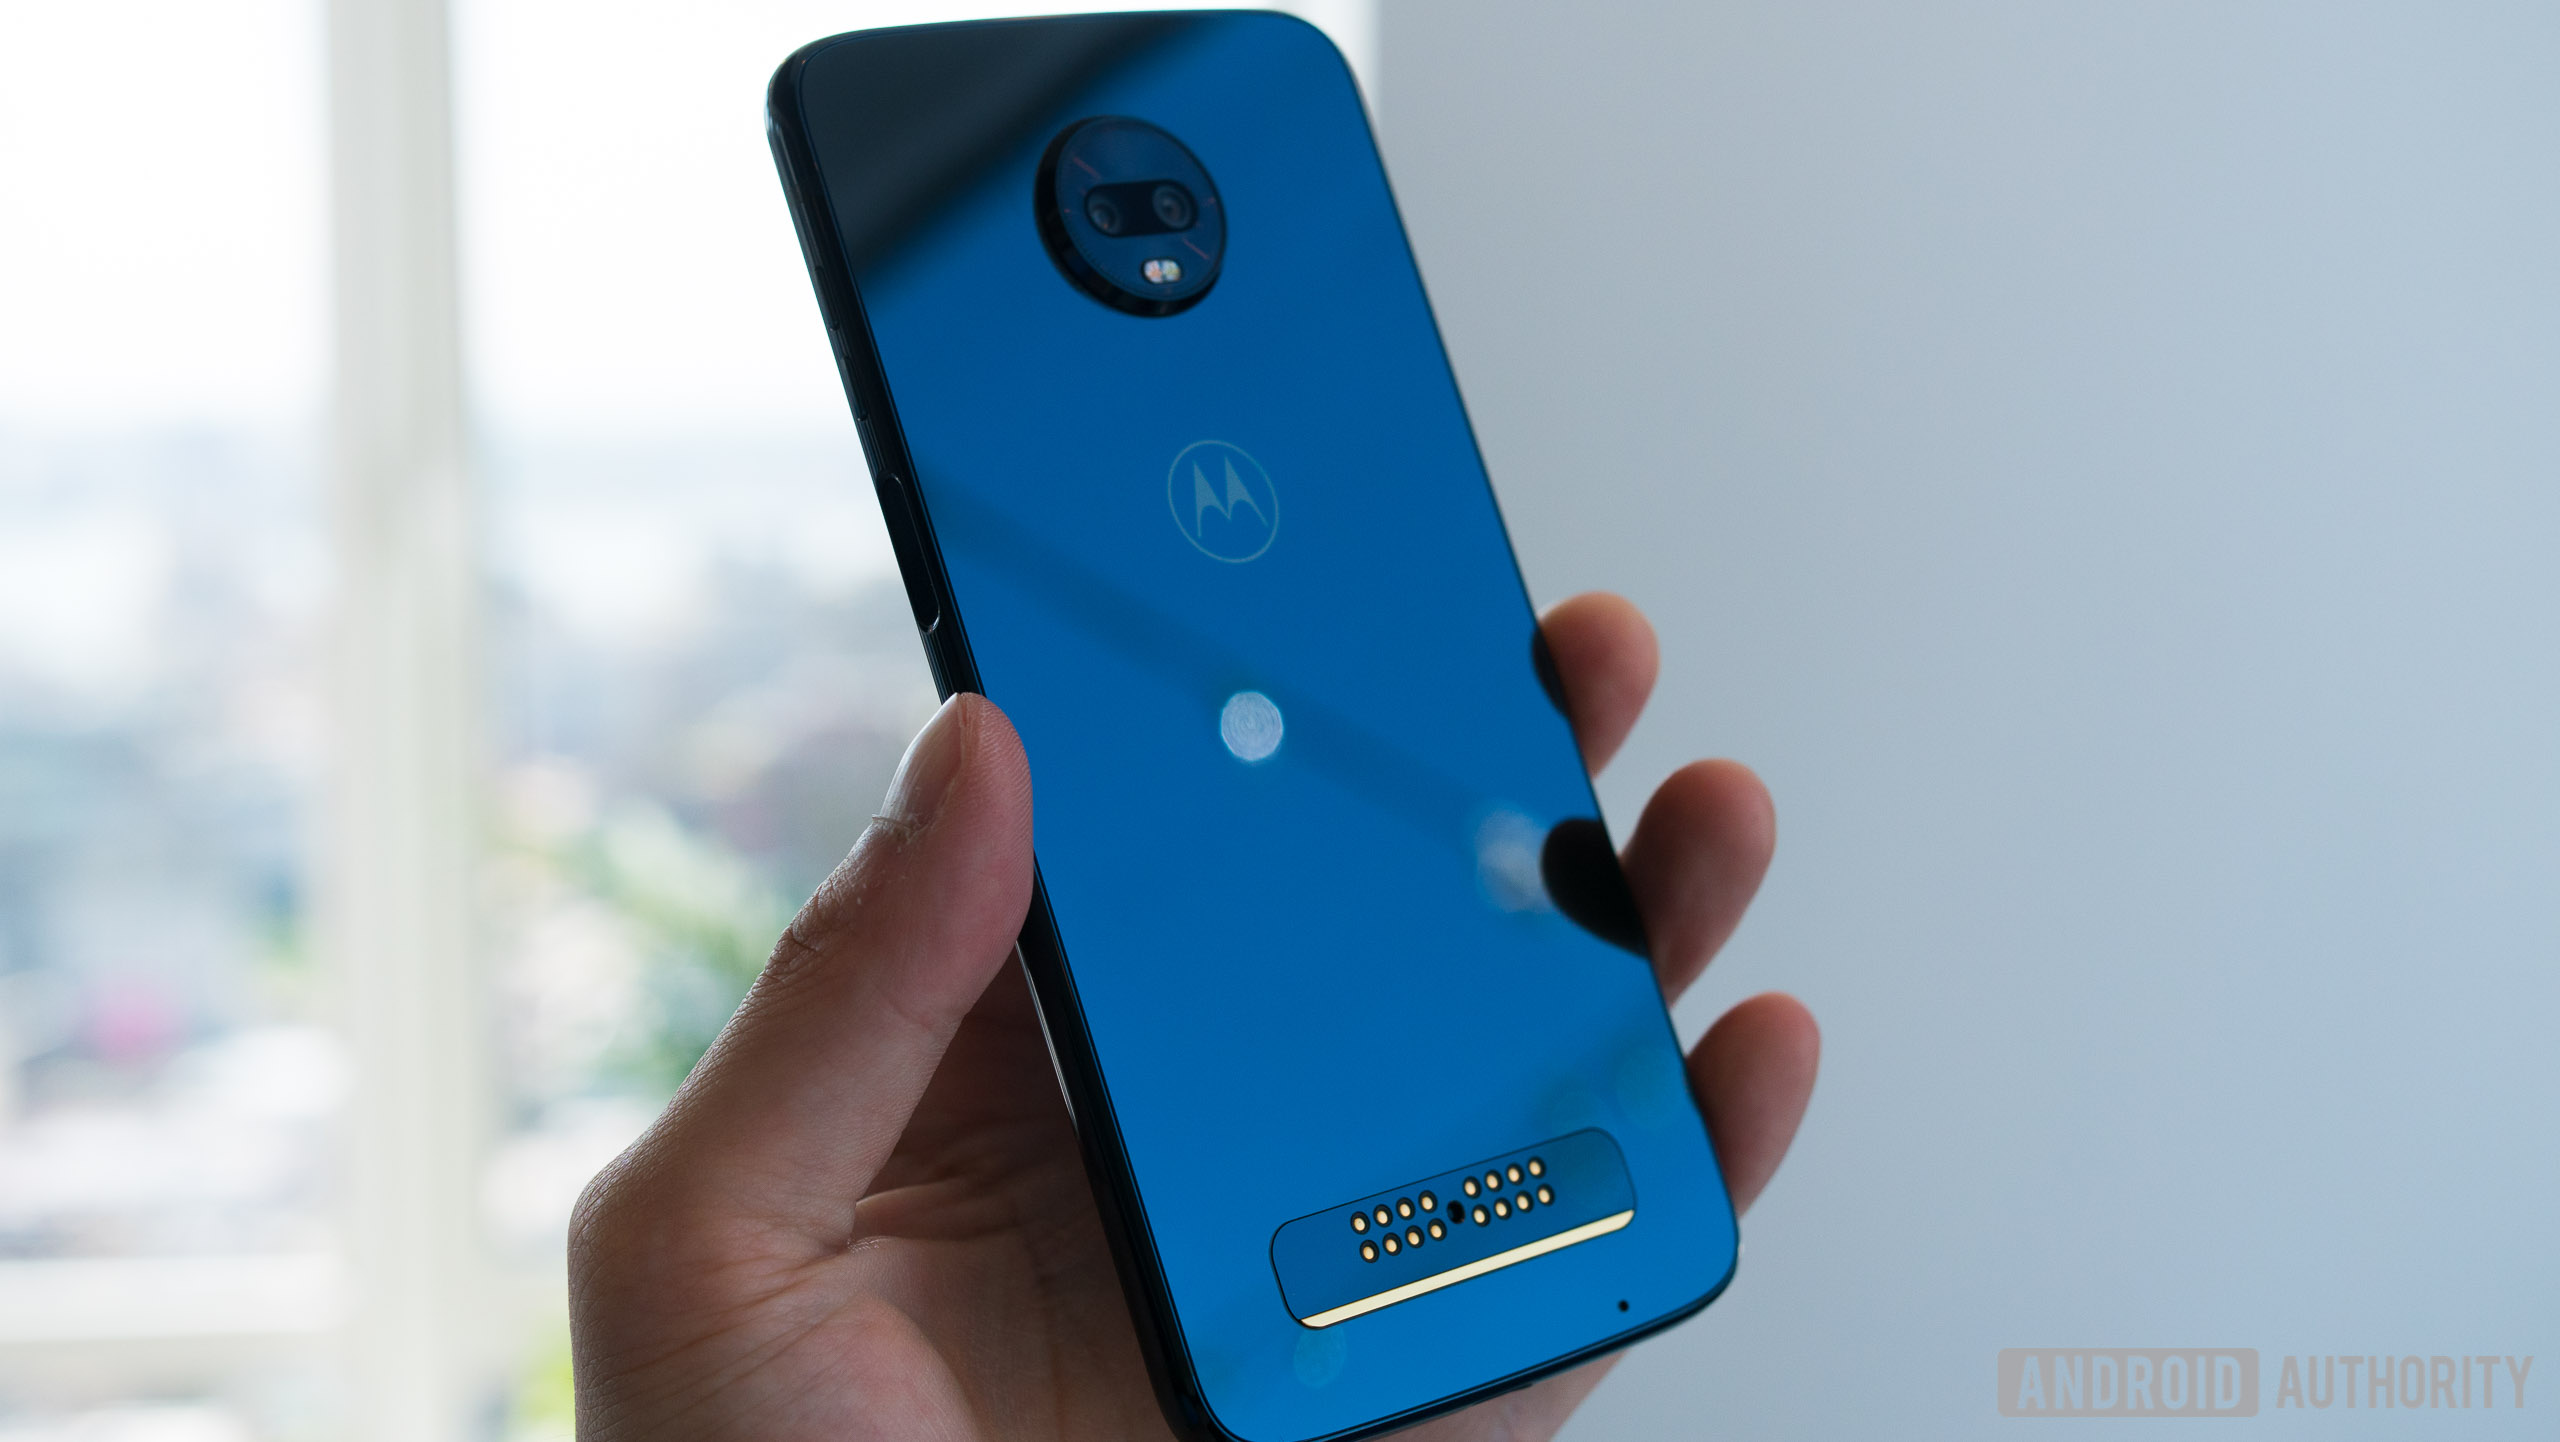 Moto Z3 Play smartphone in blue in a person's hand. 